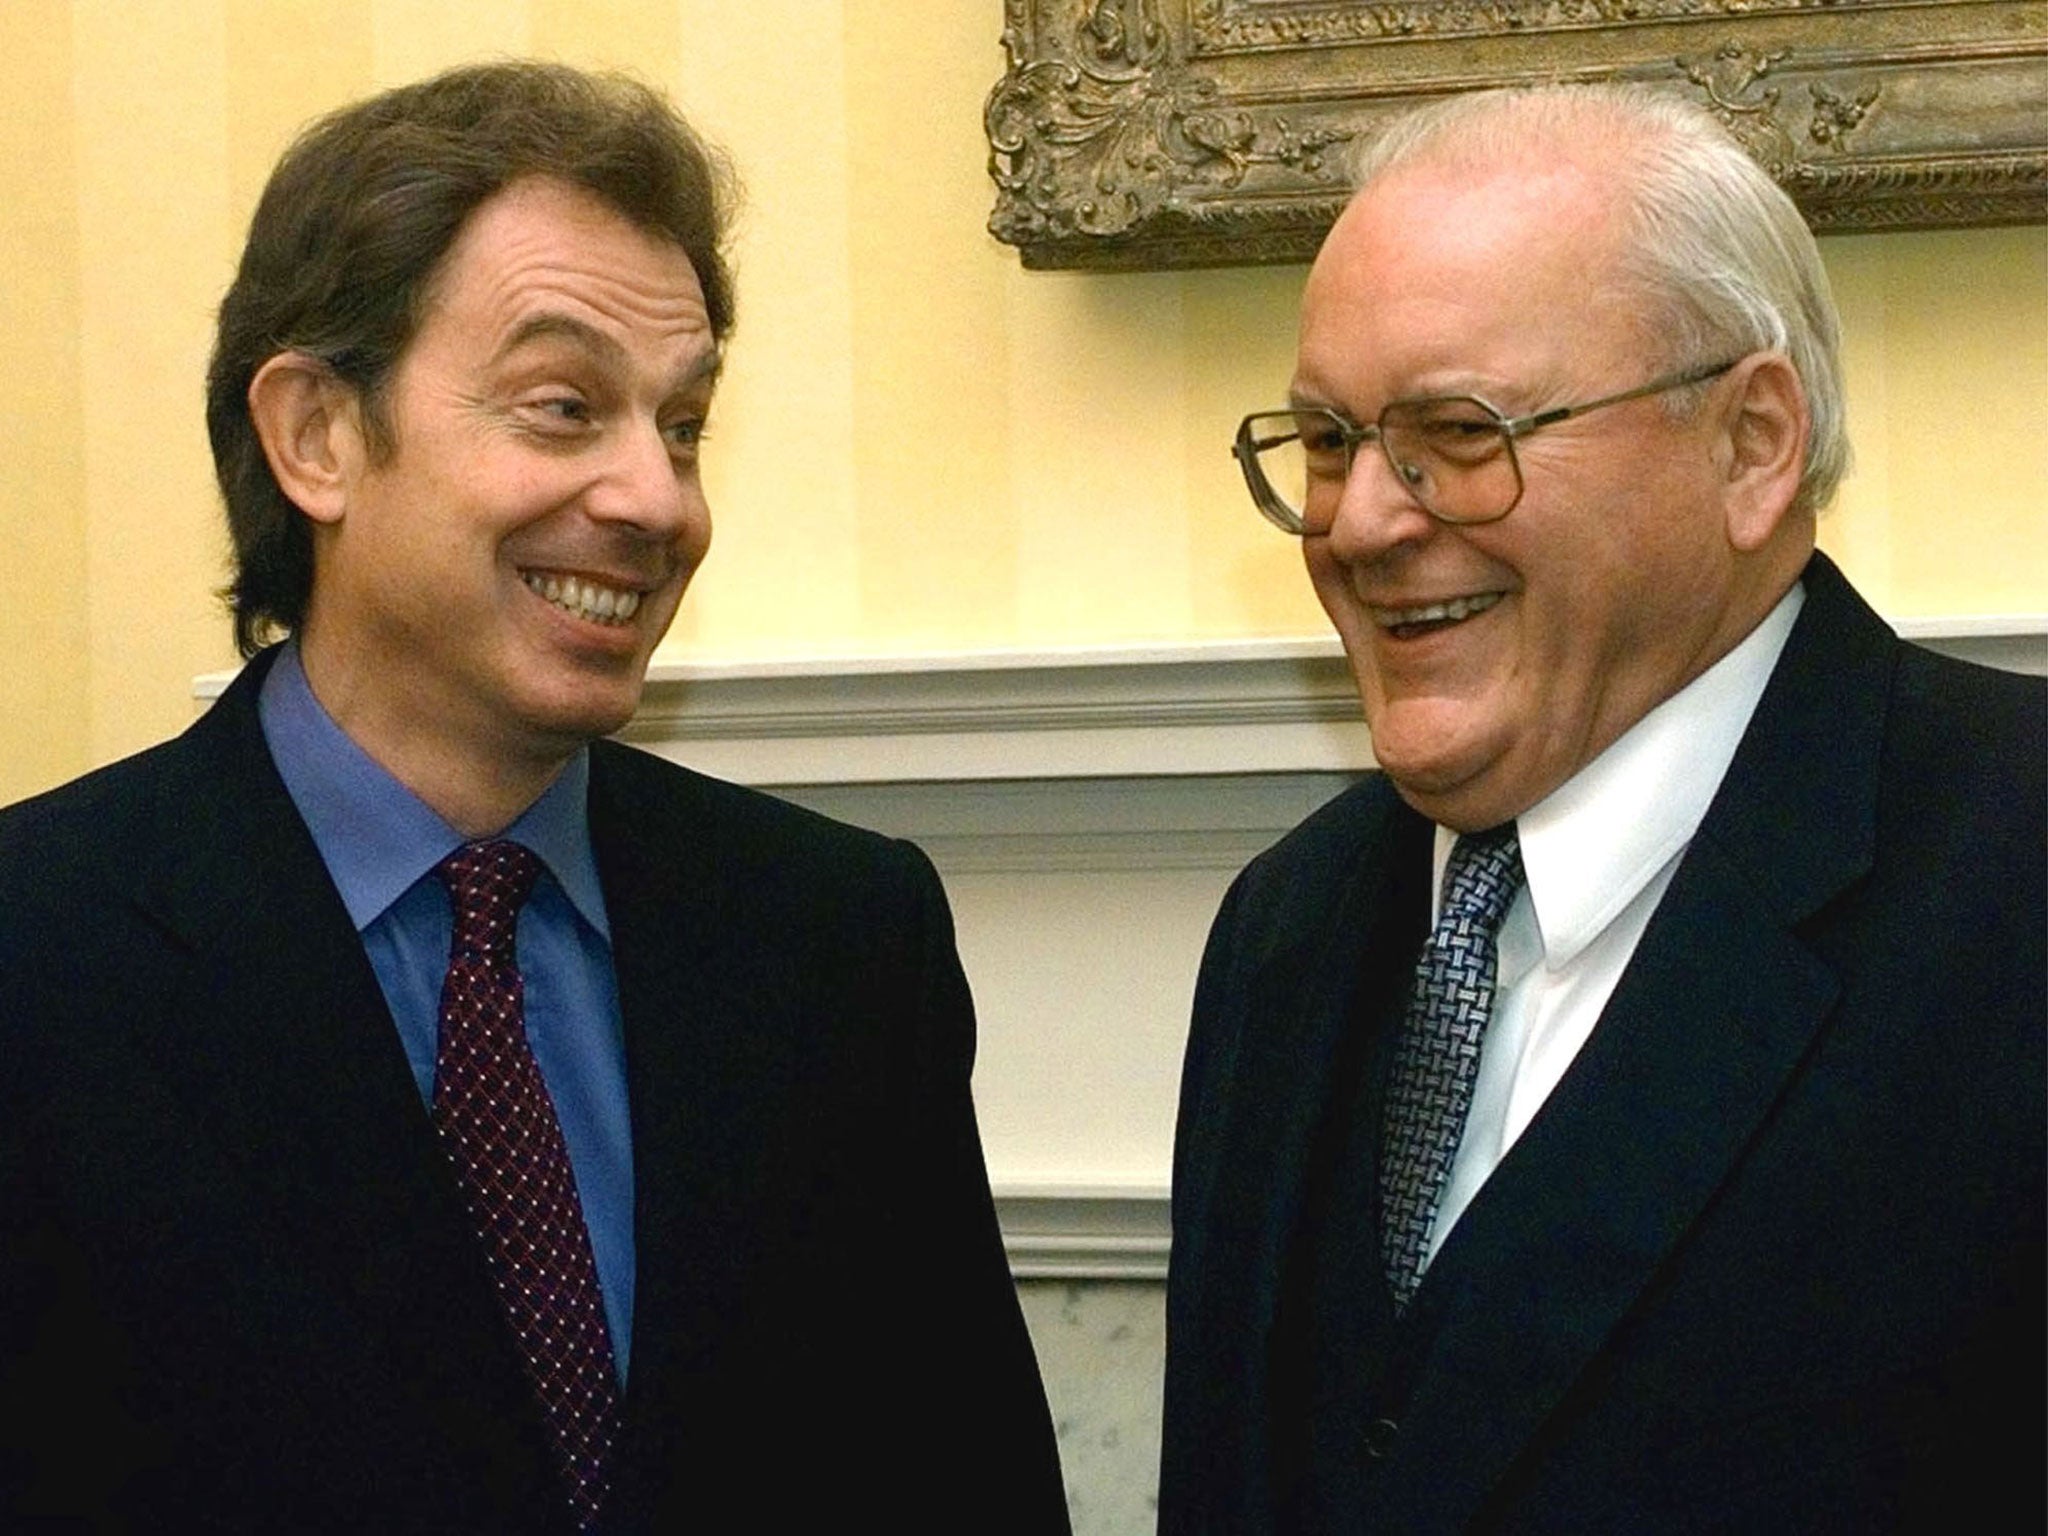 This file photo taken on December 03, 1998 shows Great Britain's Prime Minister Tony Blair (L) greeting German President Roman Herzog at Number 10 Downing Street, during a state visit